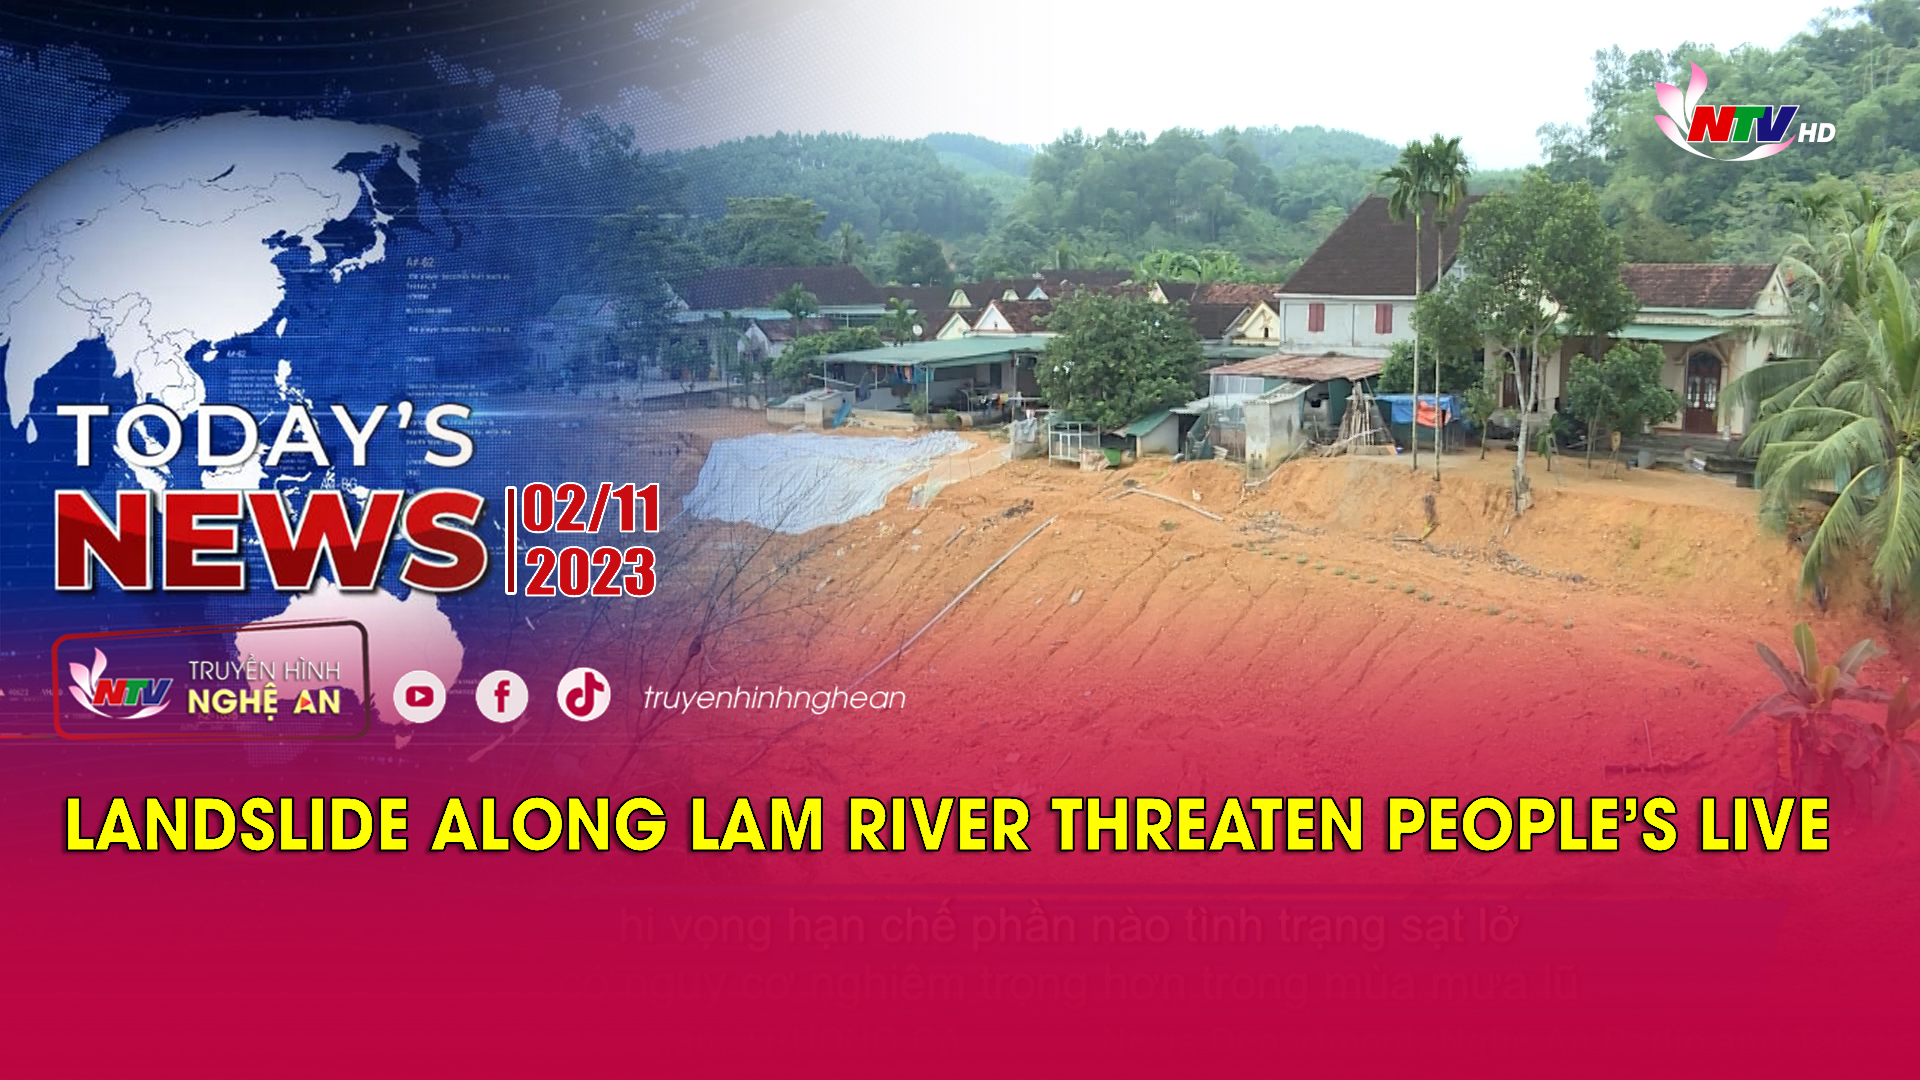 Today's News - 2/11/2023: Landslide along Lam River threaten people's live